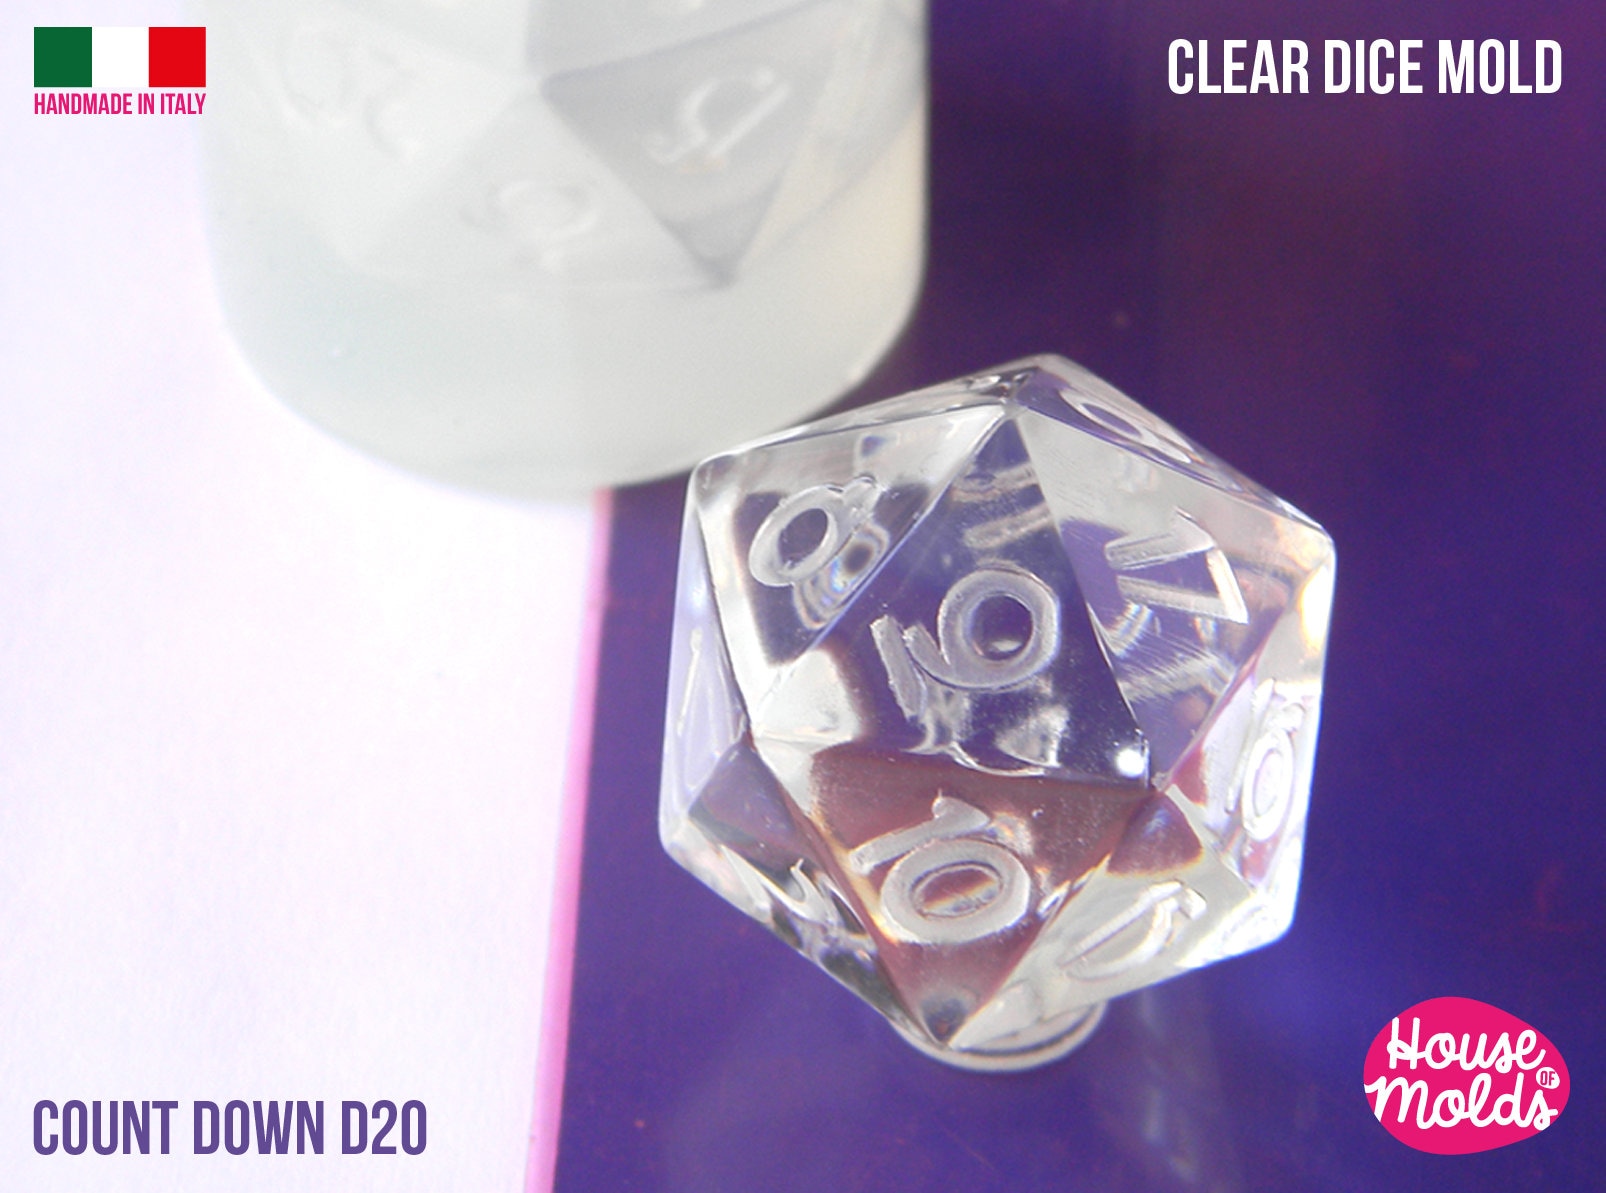 My ice D20's and the mold. Get about 7 minutes before the numbers